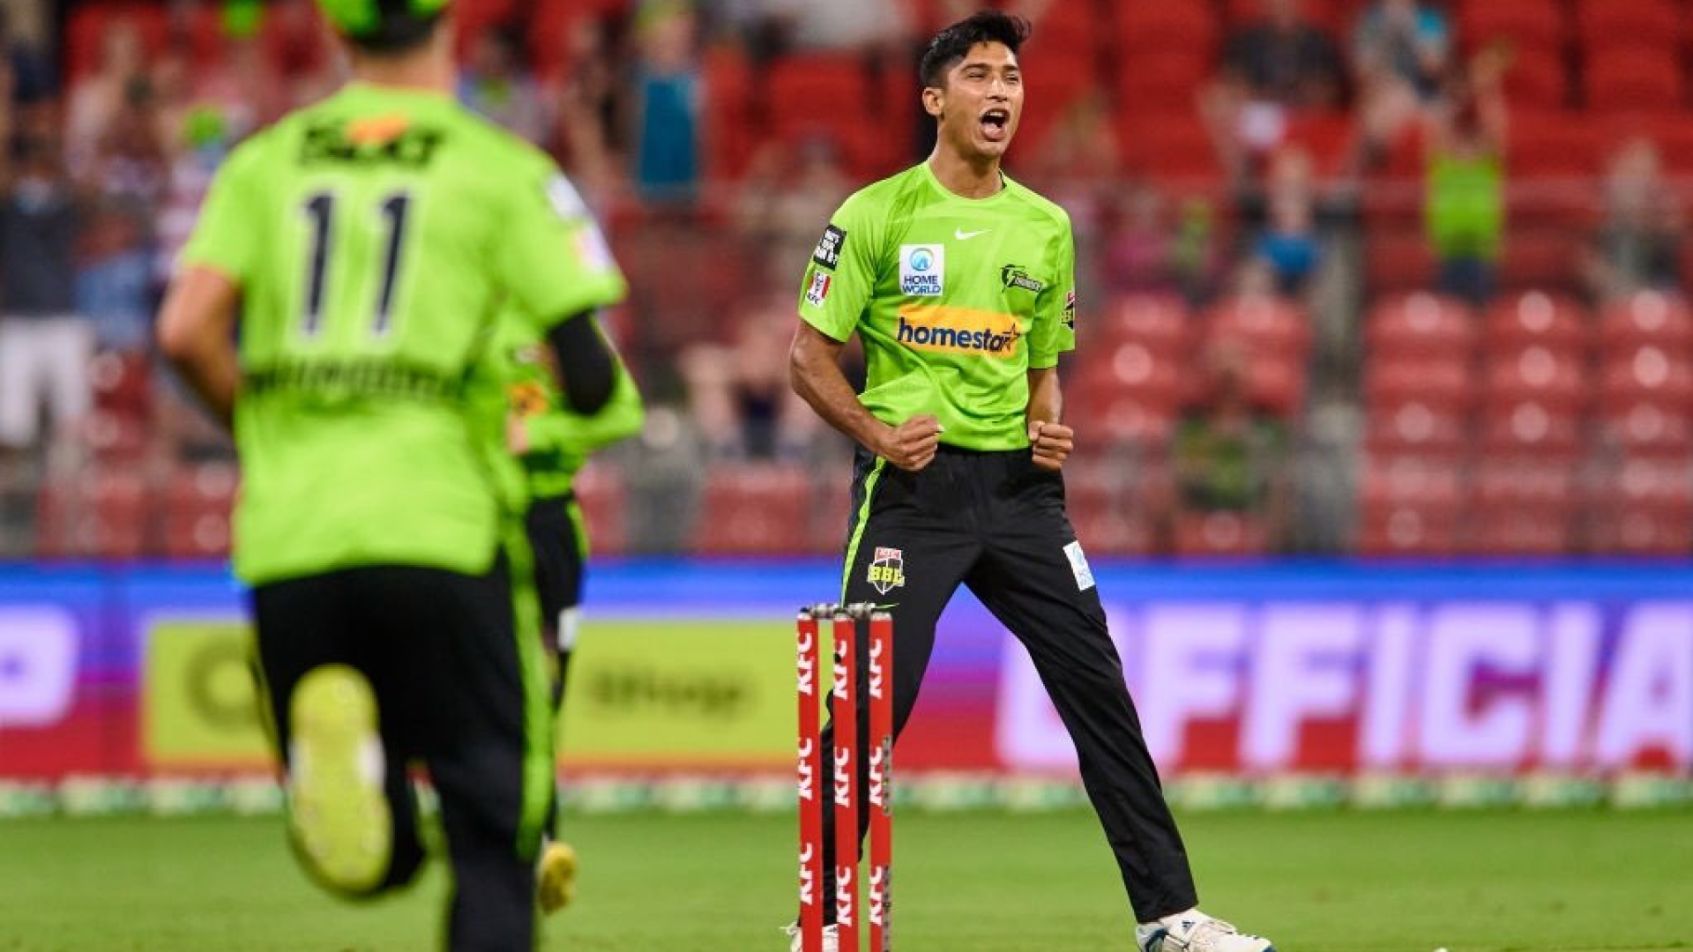 BBL 11 | Pakistan's Hasnain shines on debut, picks three wickets in four balls to guide Thunder to victory